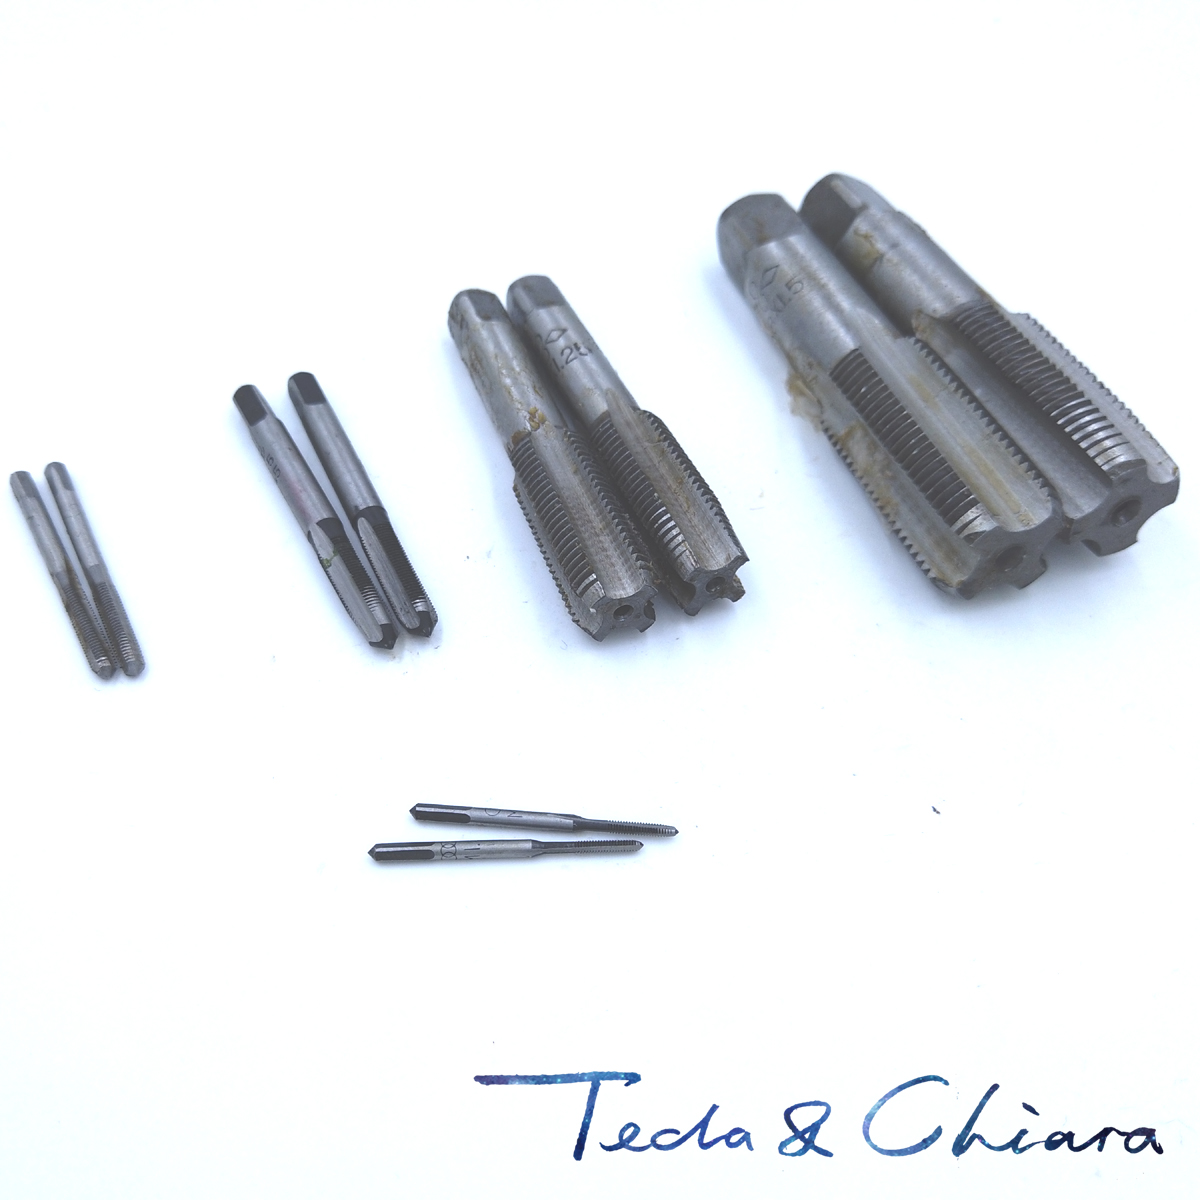 1Set M14 x 1mm 1.25mm 1.5mm 2mm Right hand Tap Metric Taper and Plug Pitch For Mold Machining * 1 1.25 1.5 2